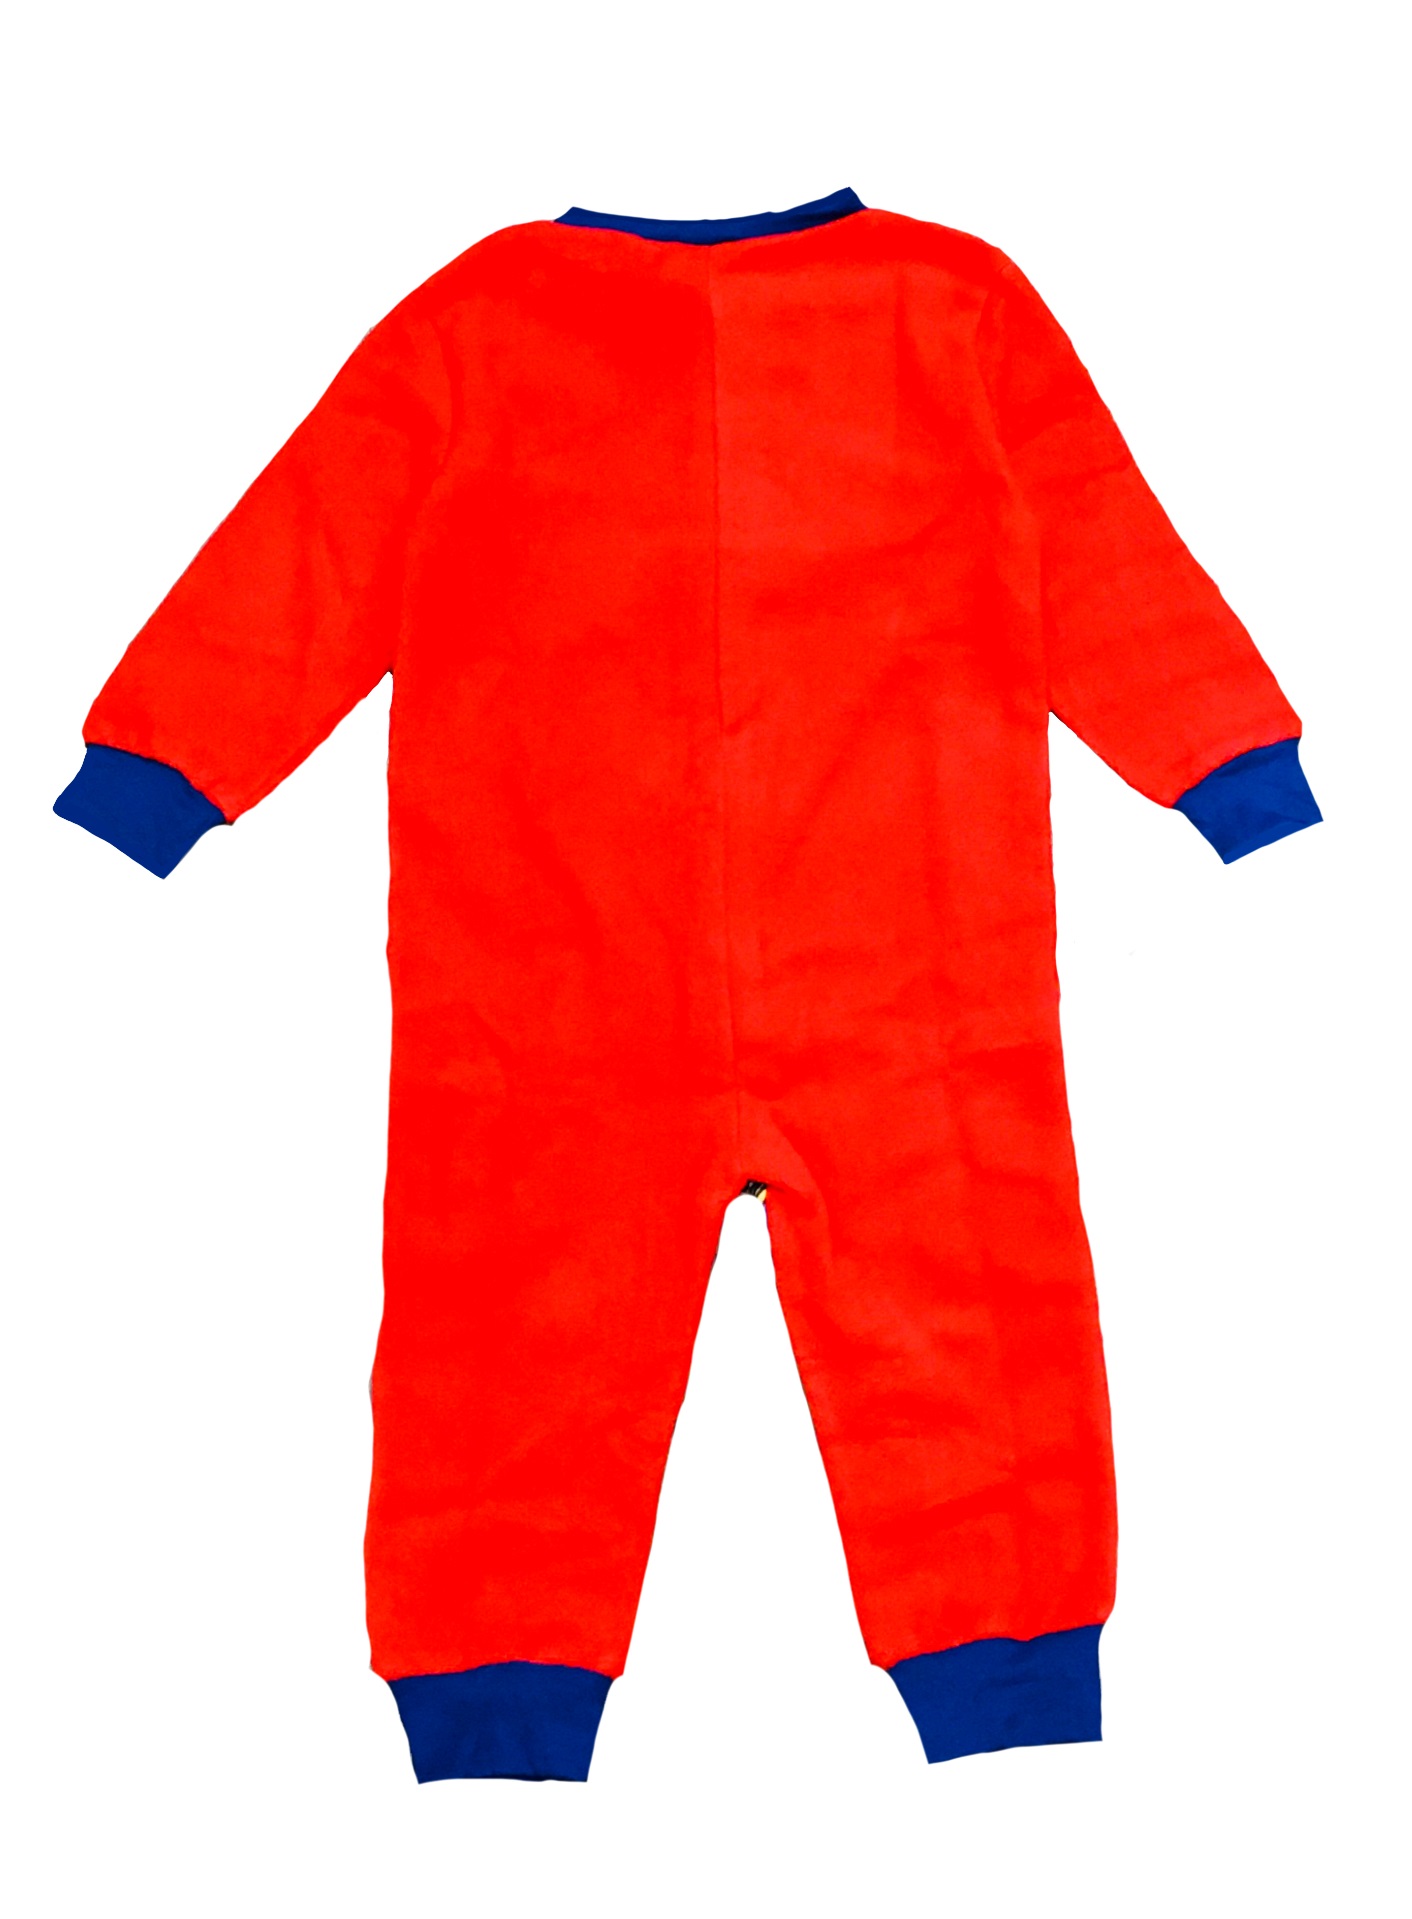 Boys Paw Patrol Onesie Age 2-6 Years - Kids With Character